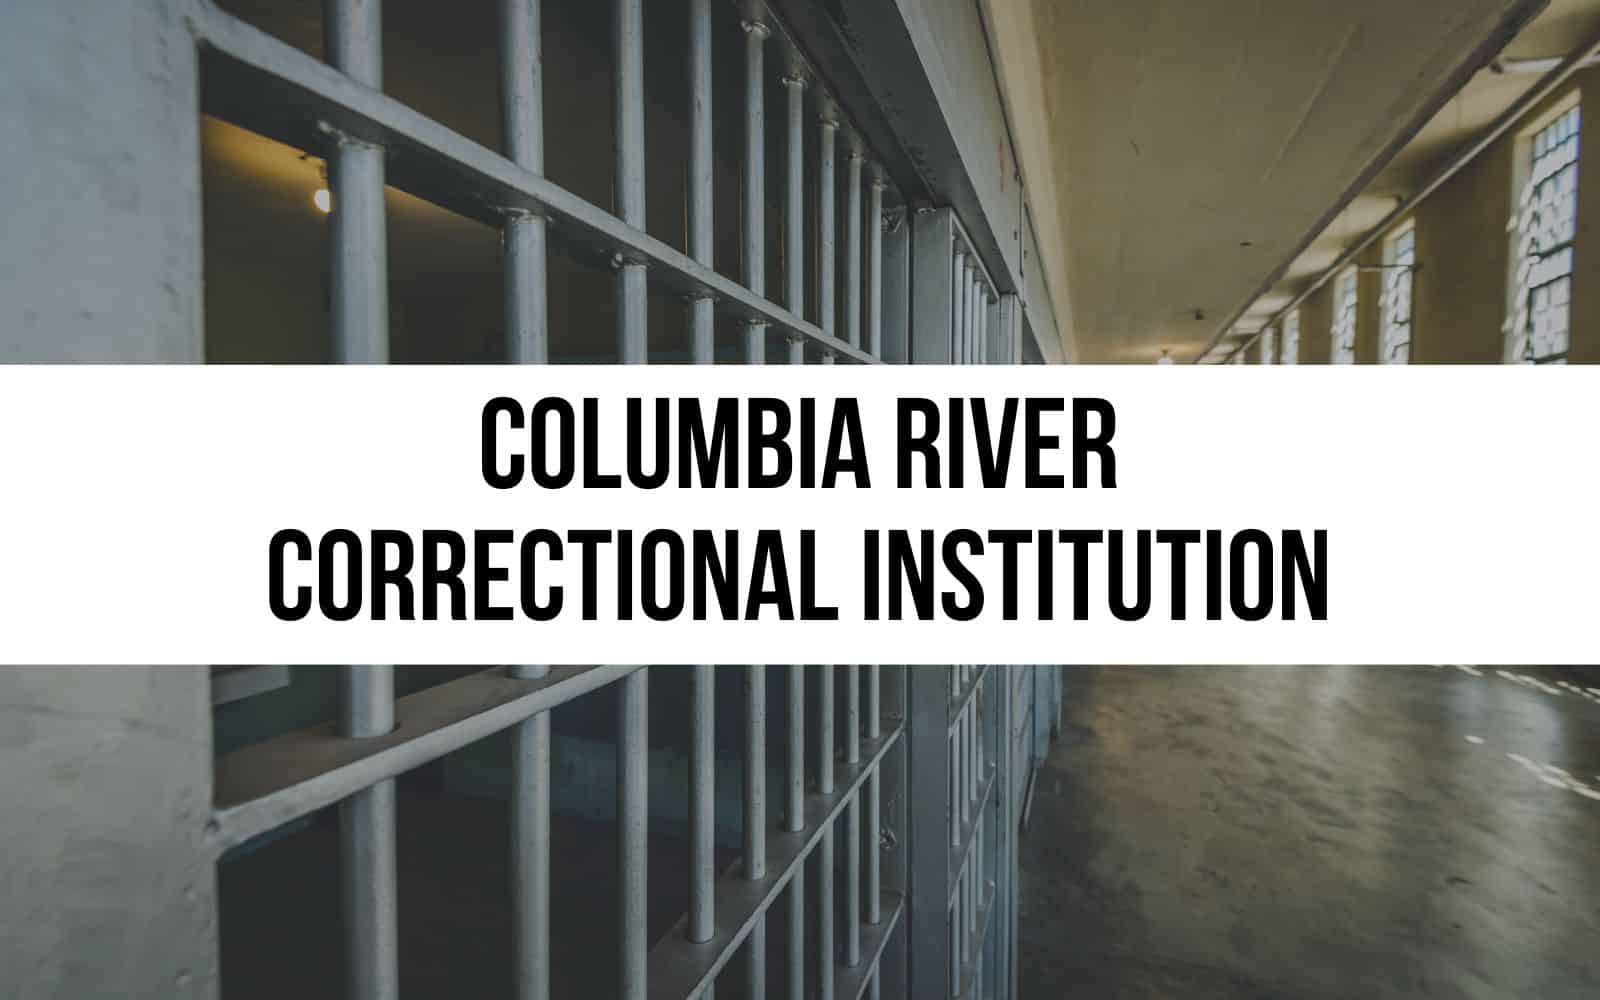 Columbia River Correctional Institution